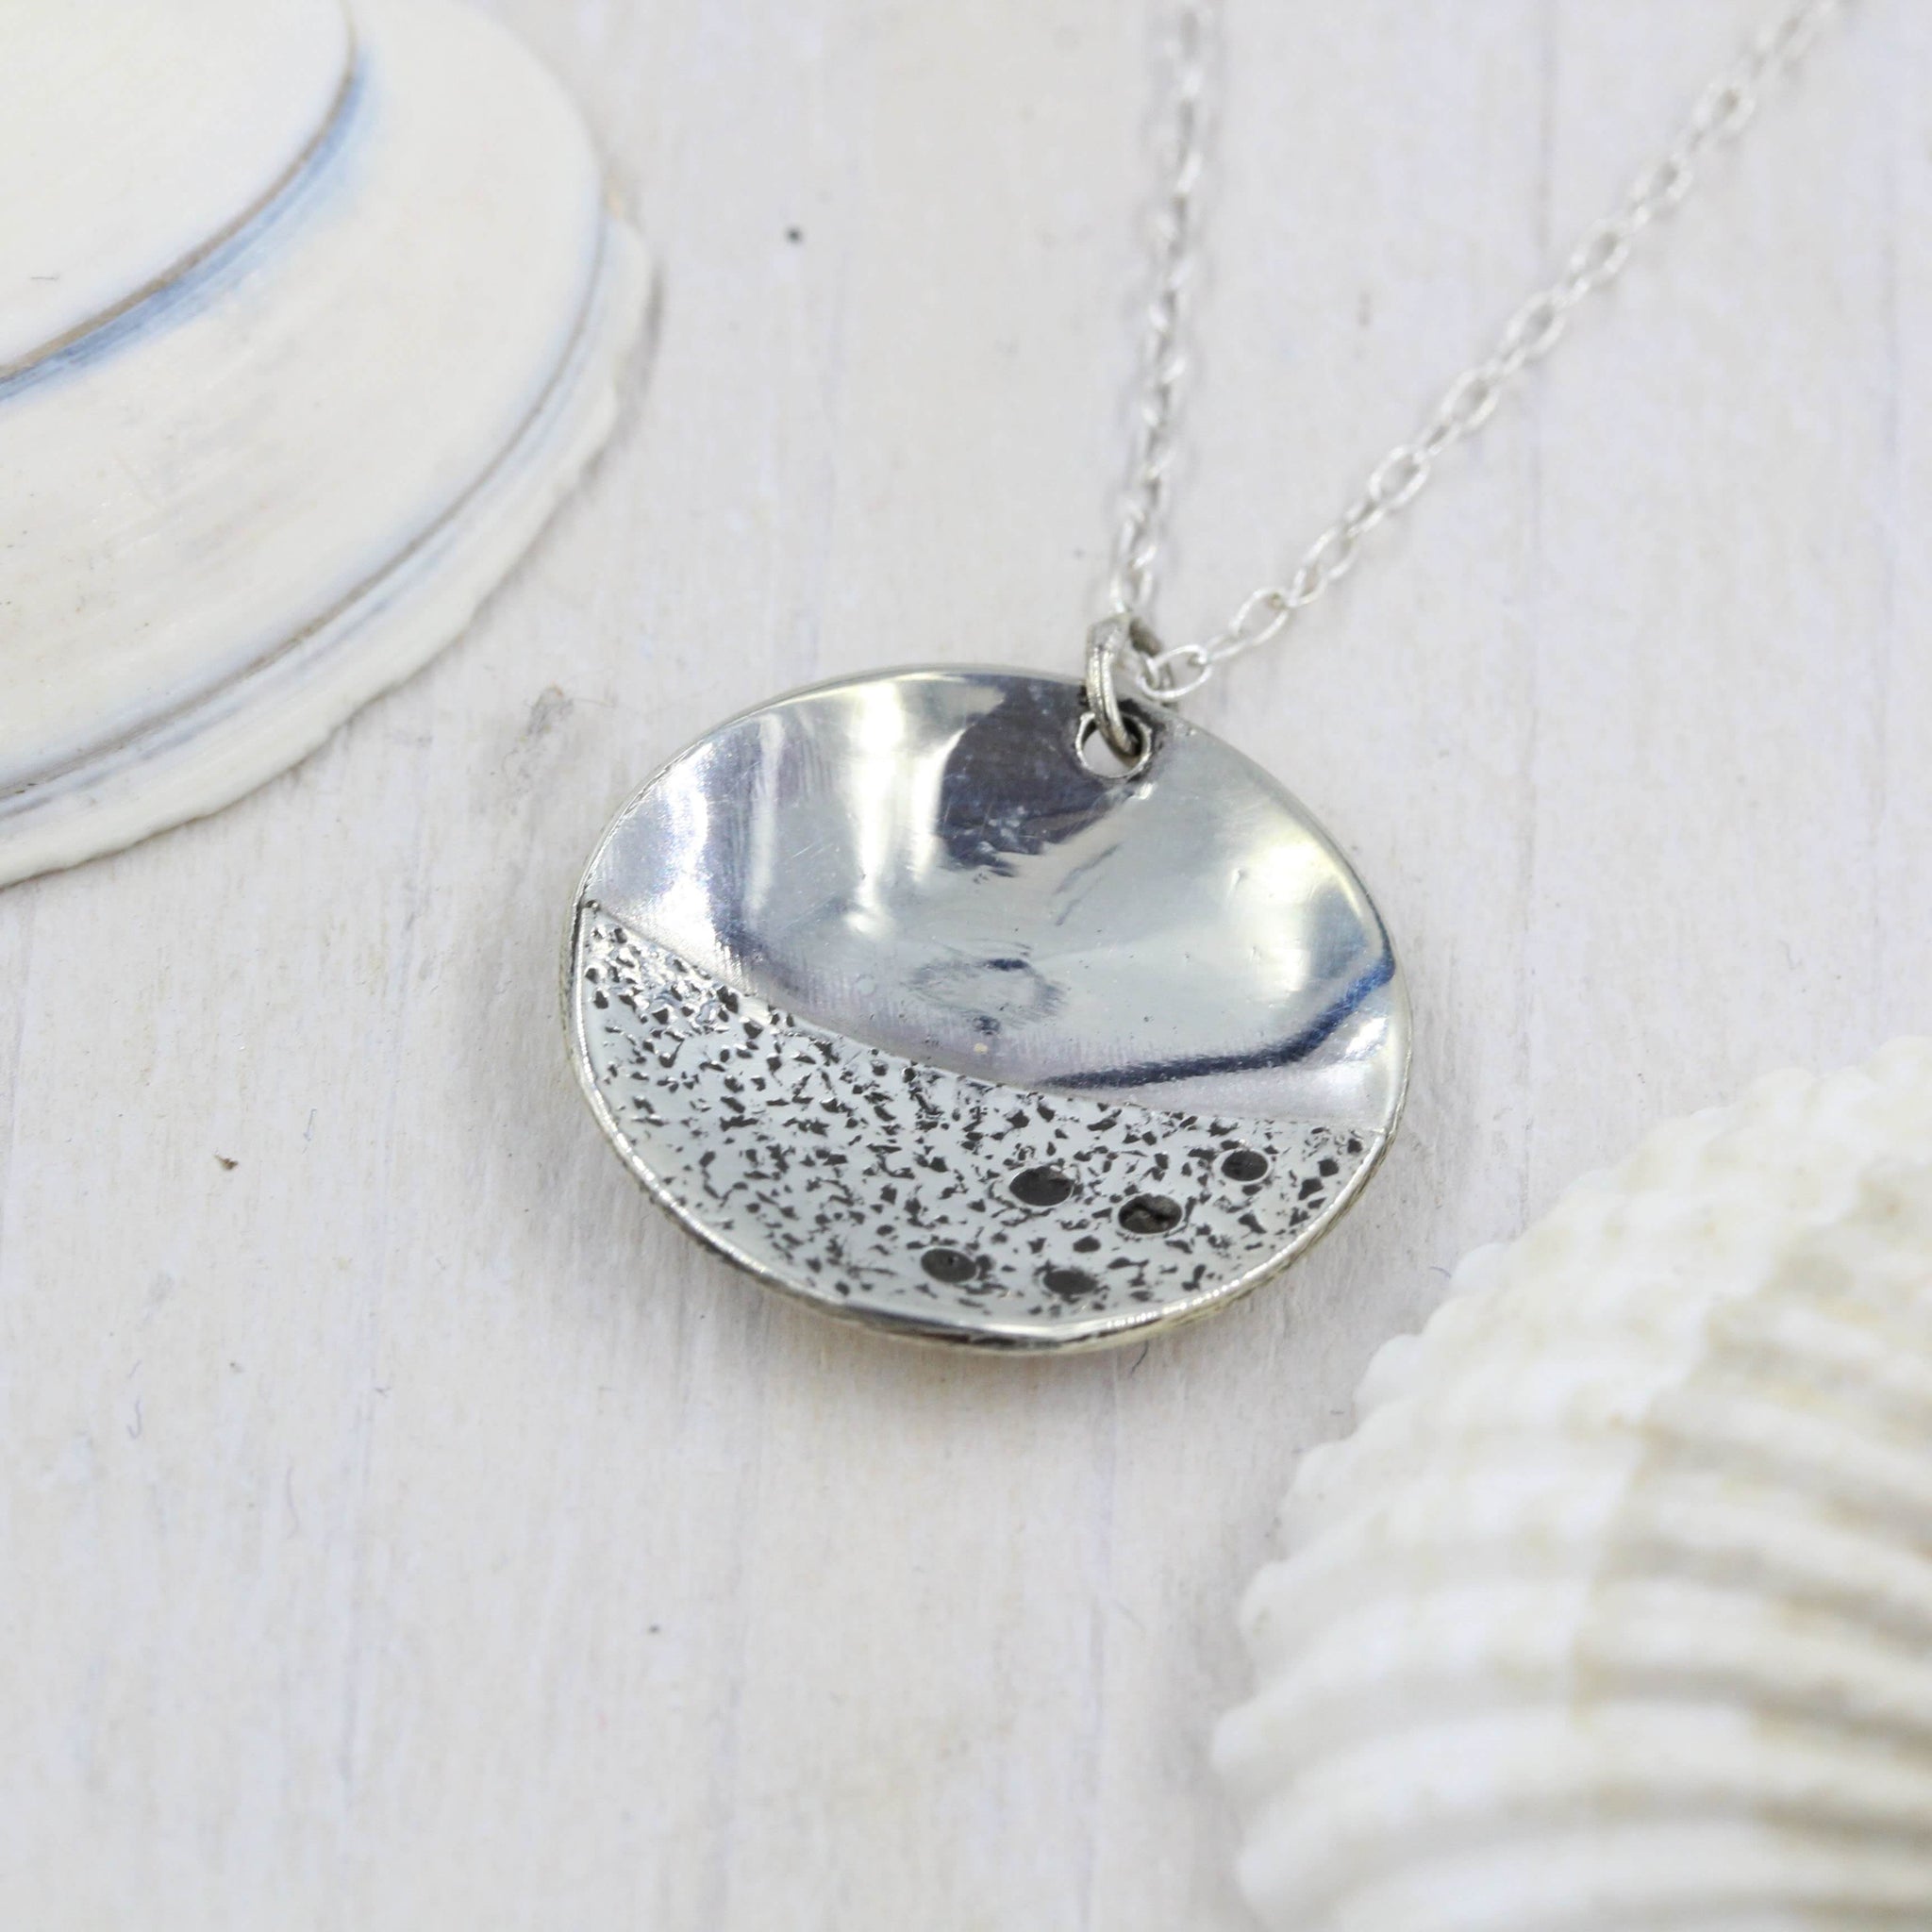 Handmade sea inspired, sterling silver necklace